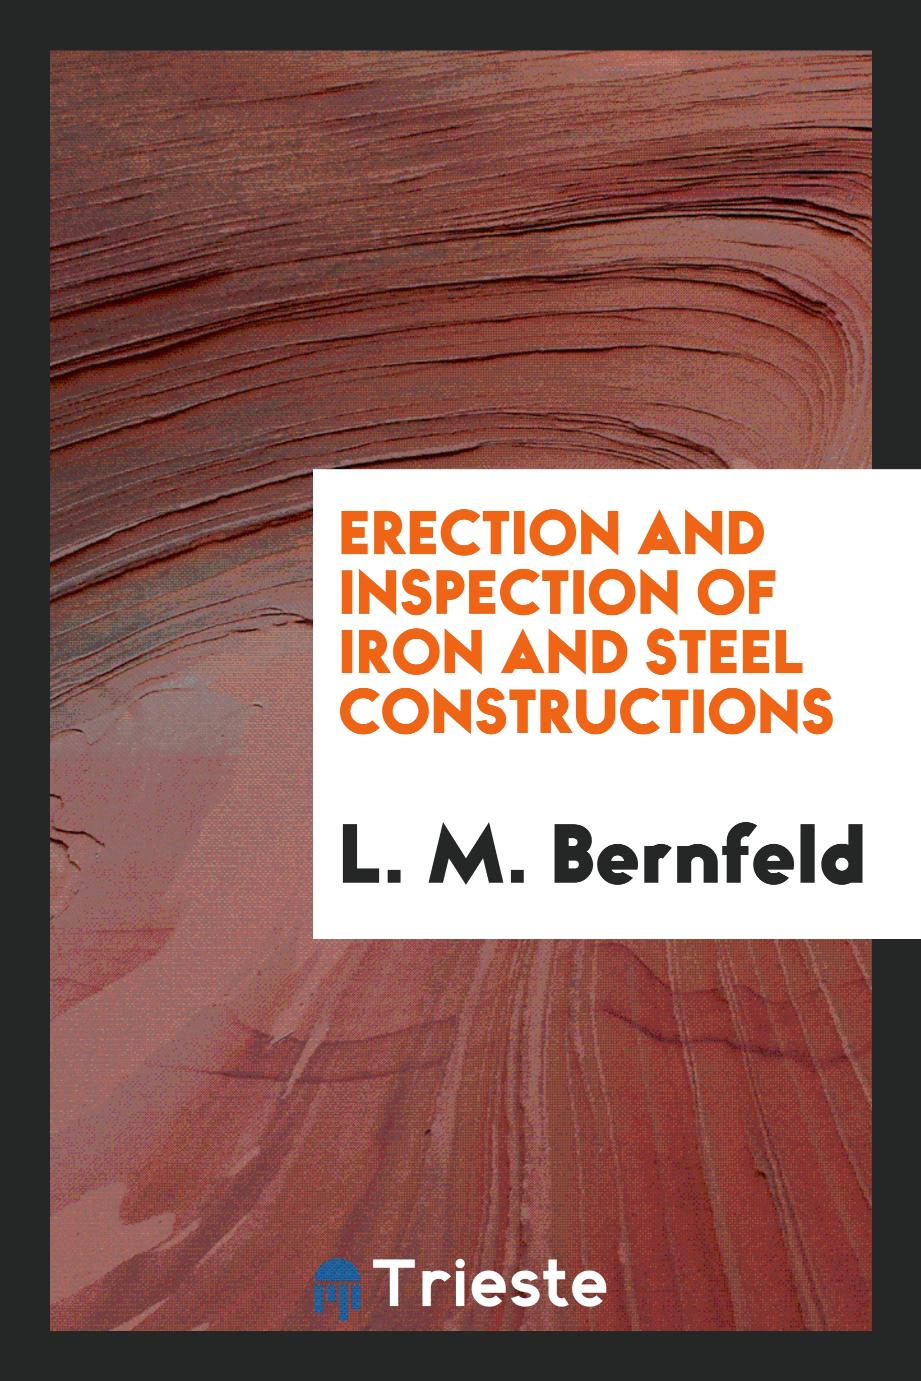 L. M. Bernfeld - Erection and Inspection of Iron and Steel Constructions